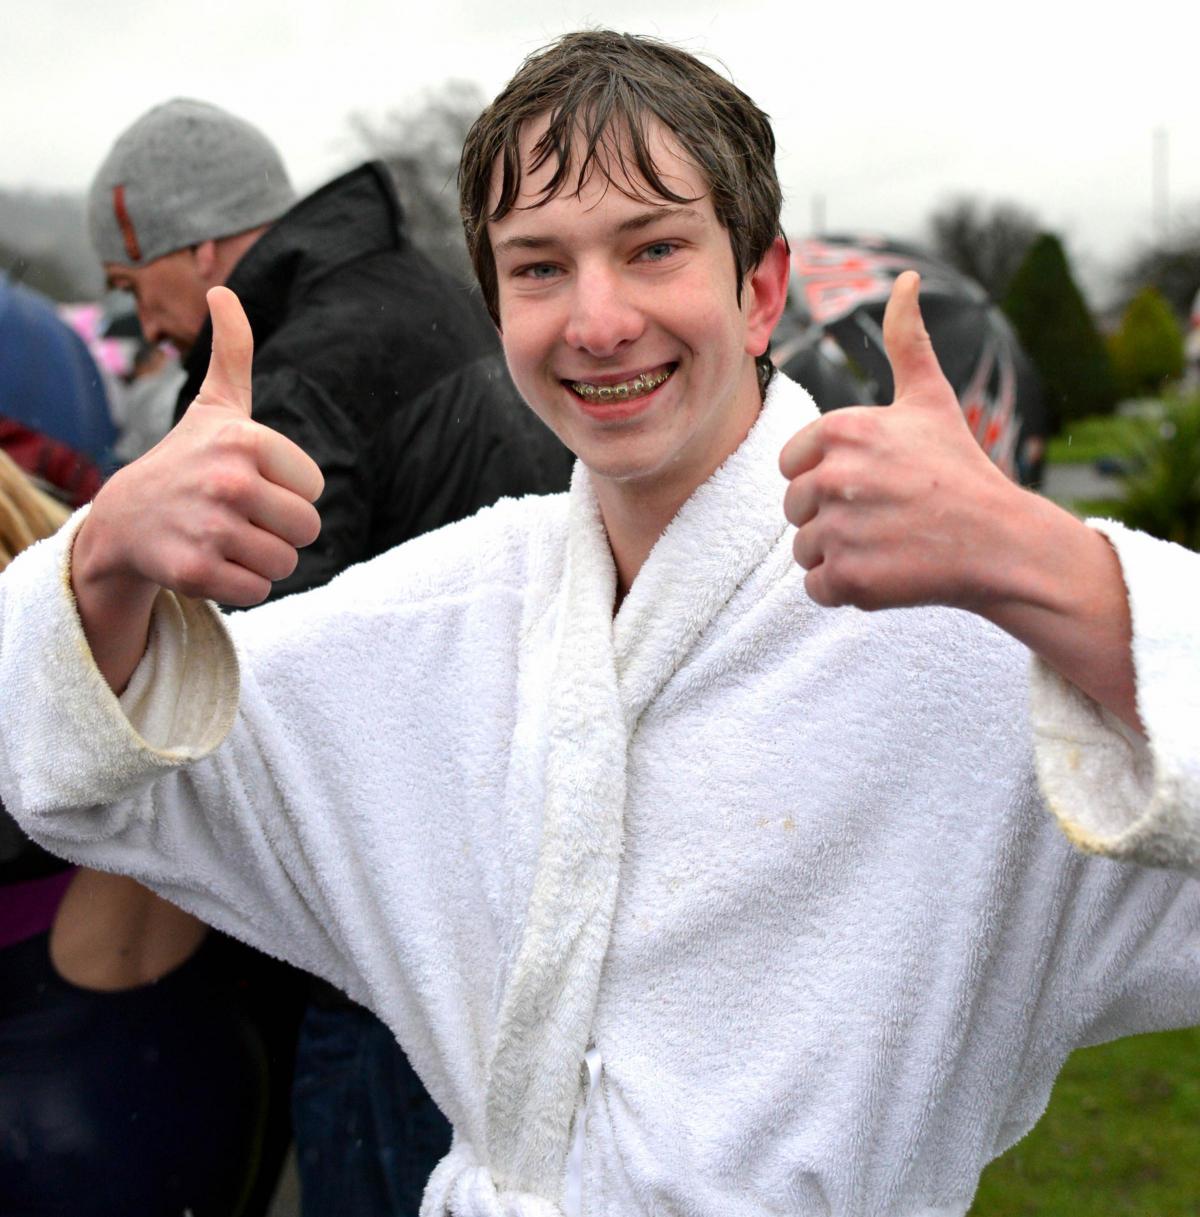 Sam Altum, from Texas, gives the thumbs-up after taking part in the ‘awesome’  Wharfe swim